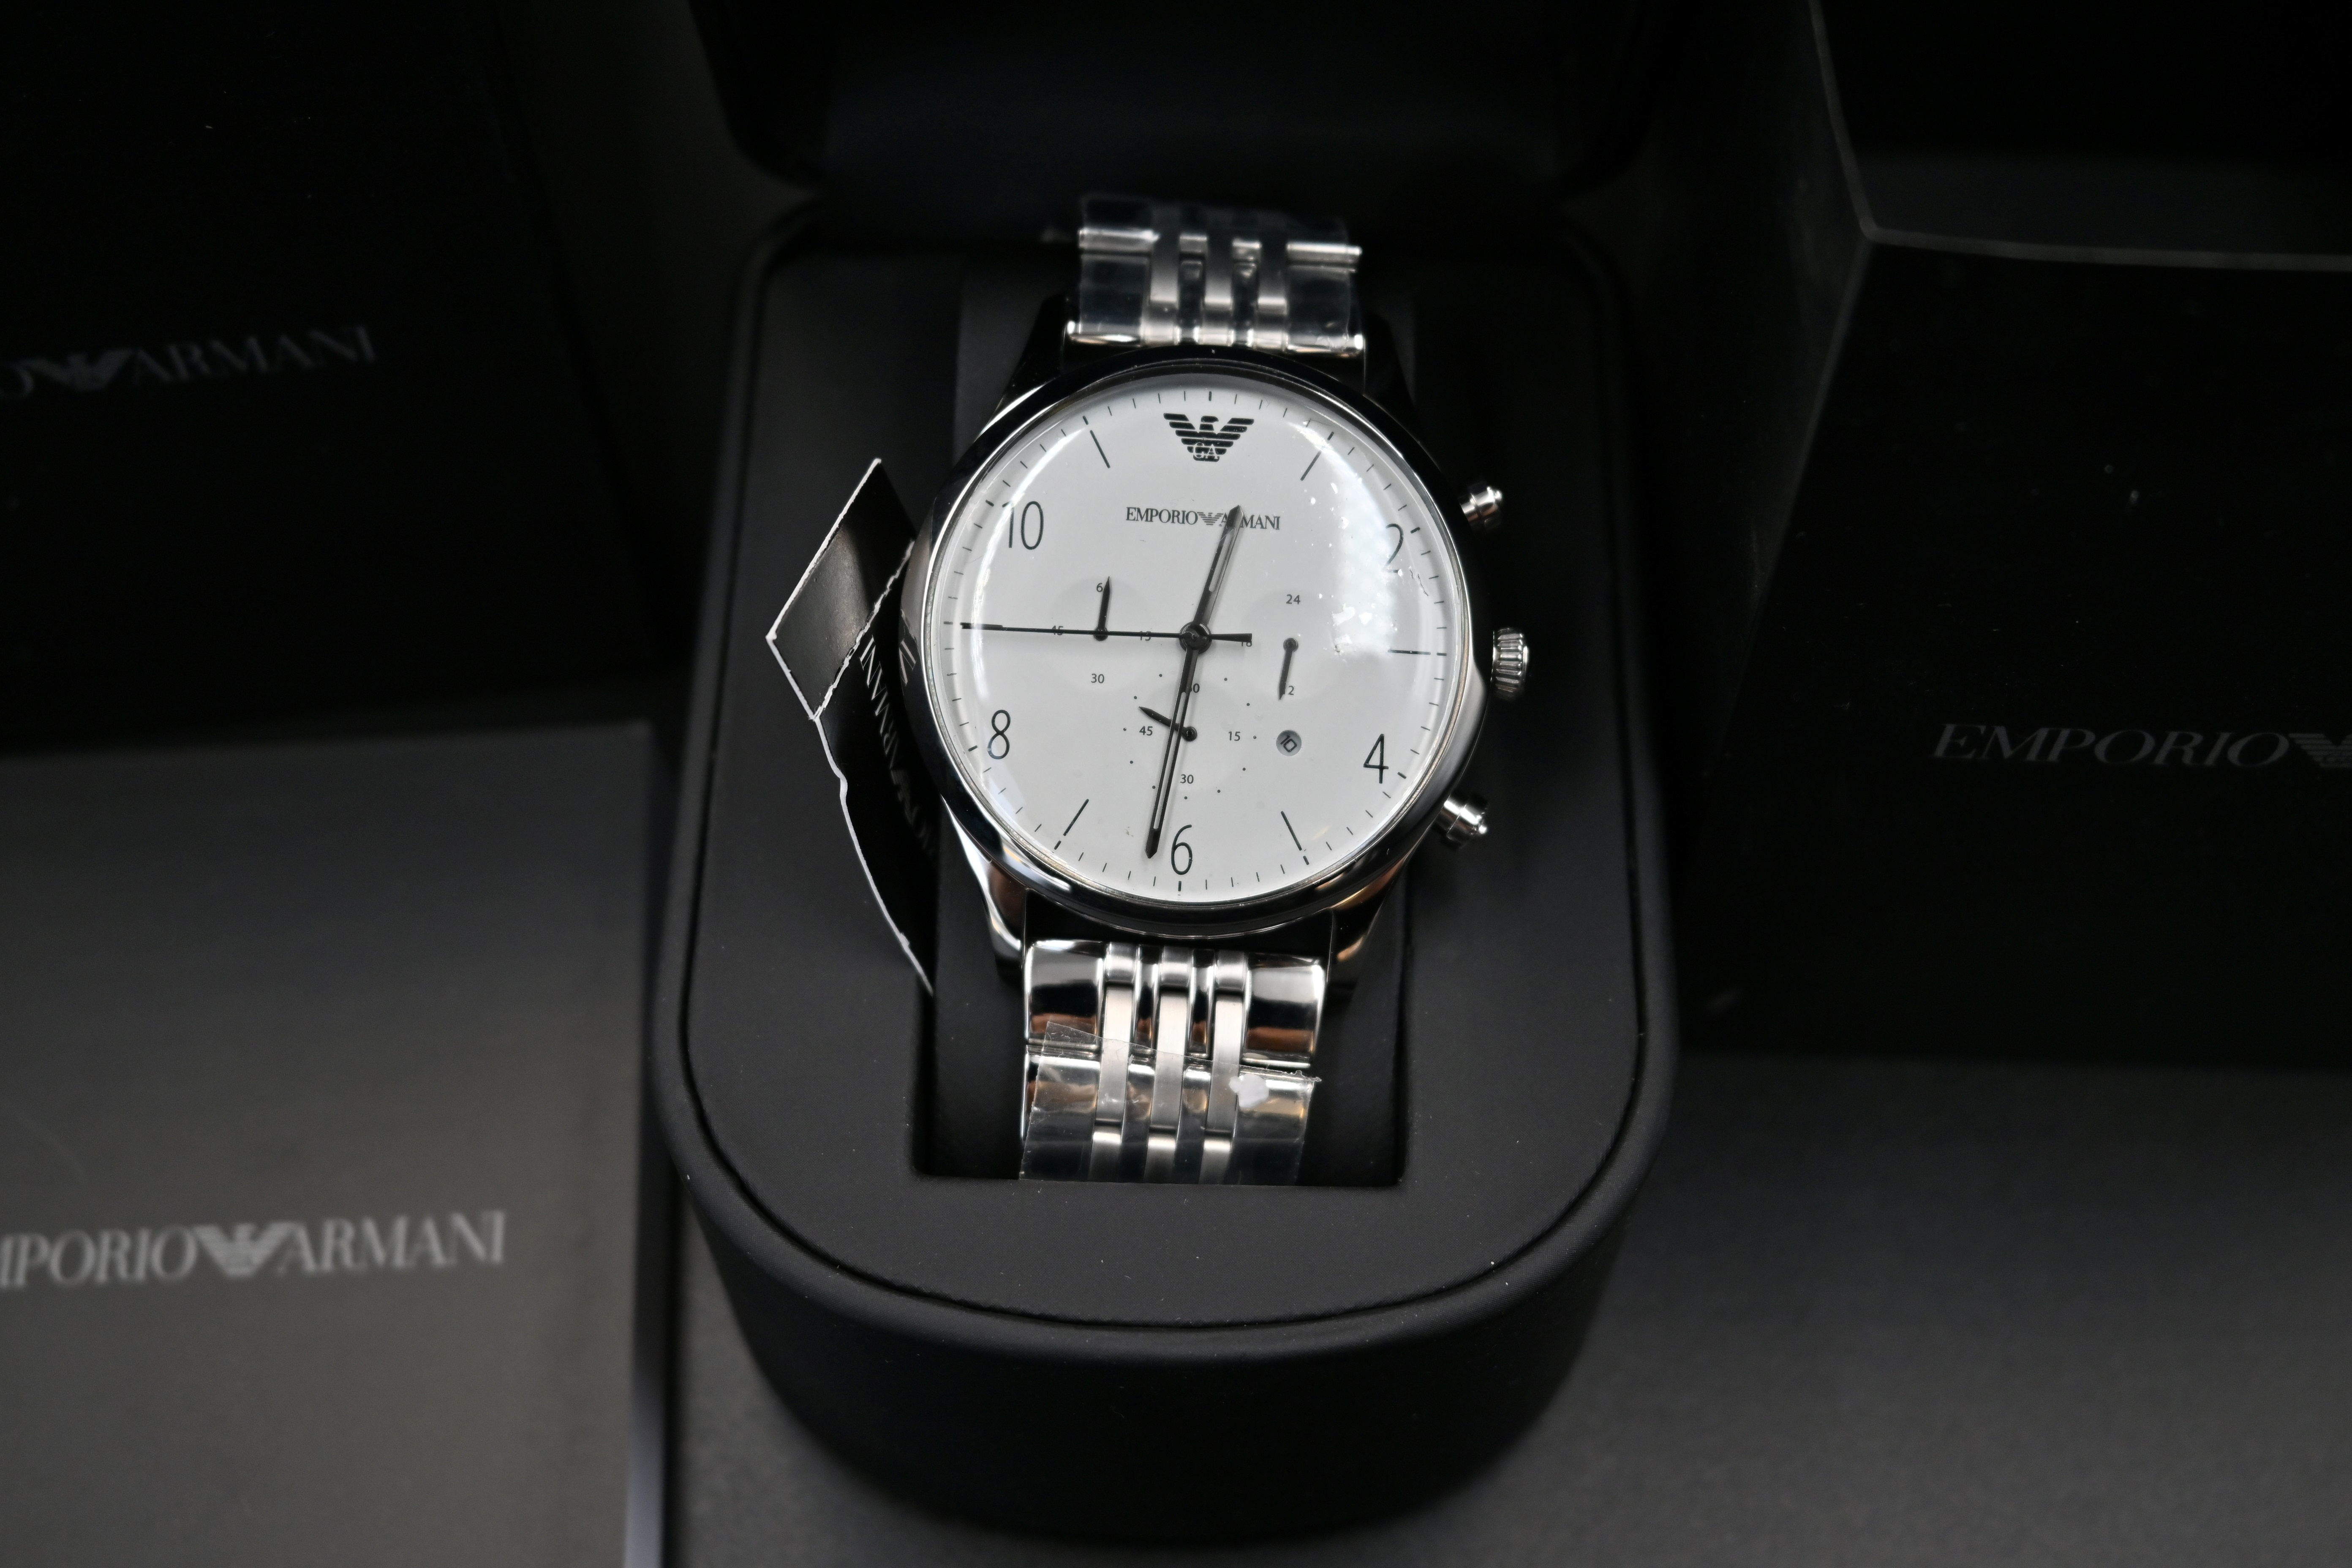 2 Emporio Armani mens watches to include AR1879 steel chronograph watch and AR1866 quartz watch with - Image 3 of 6